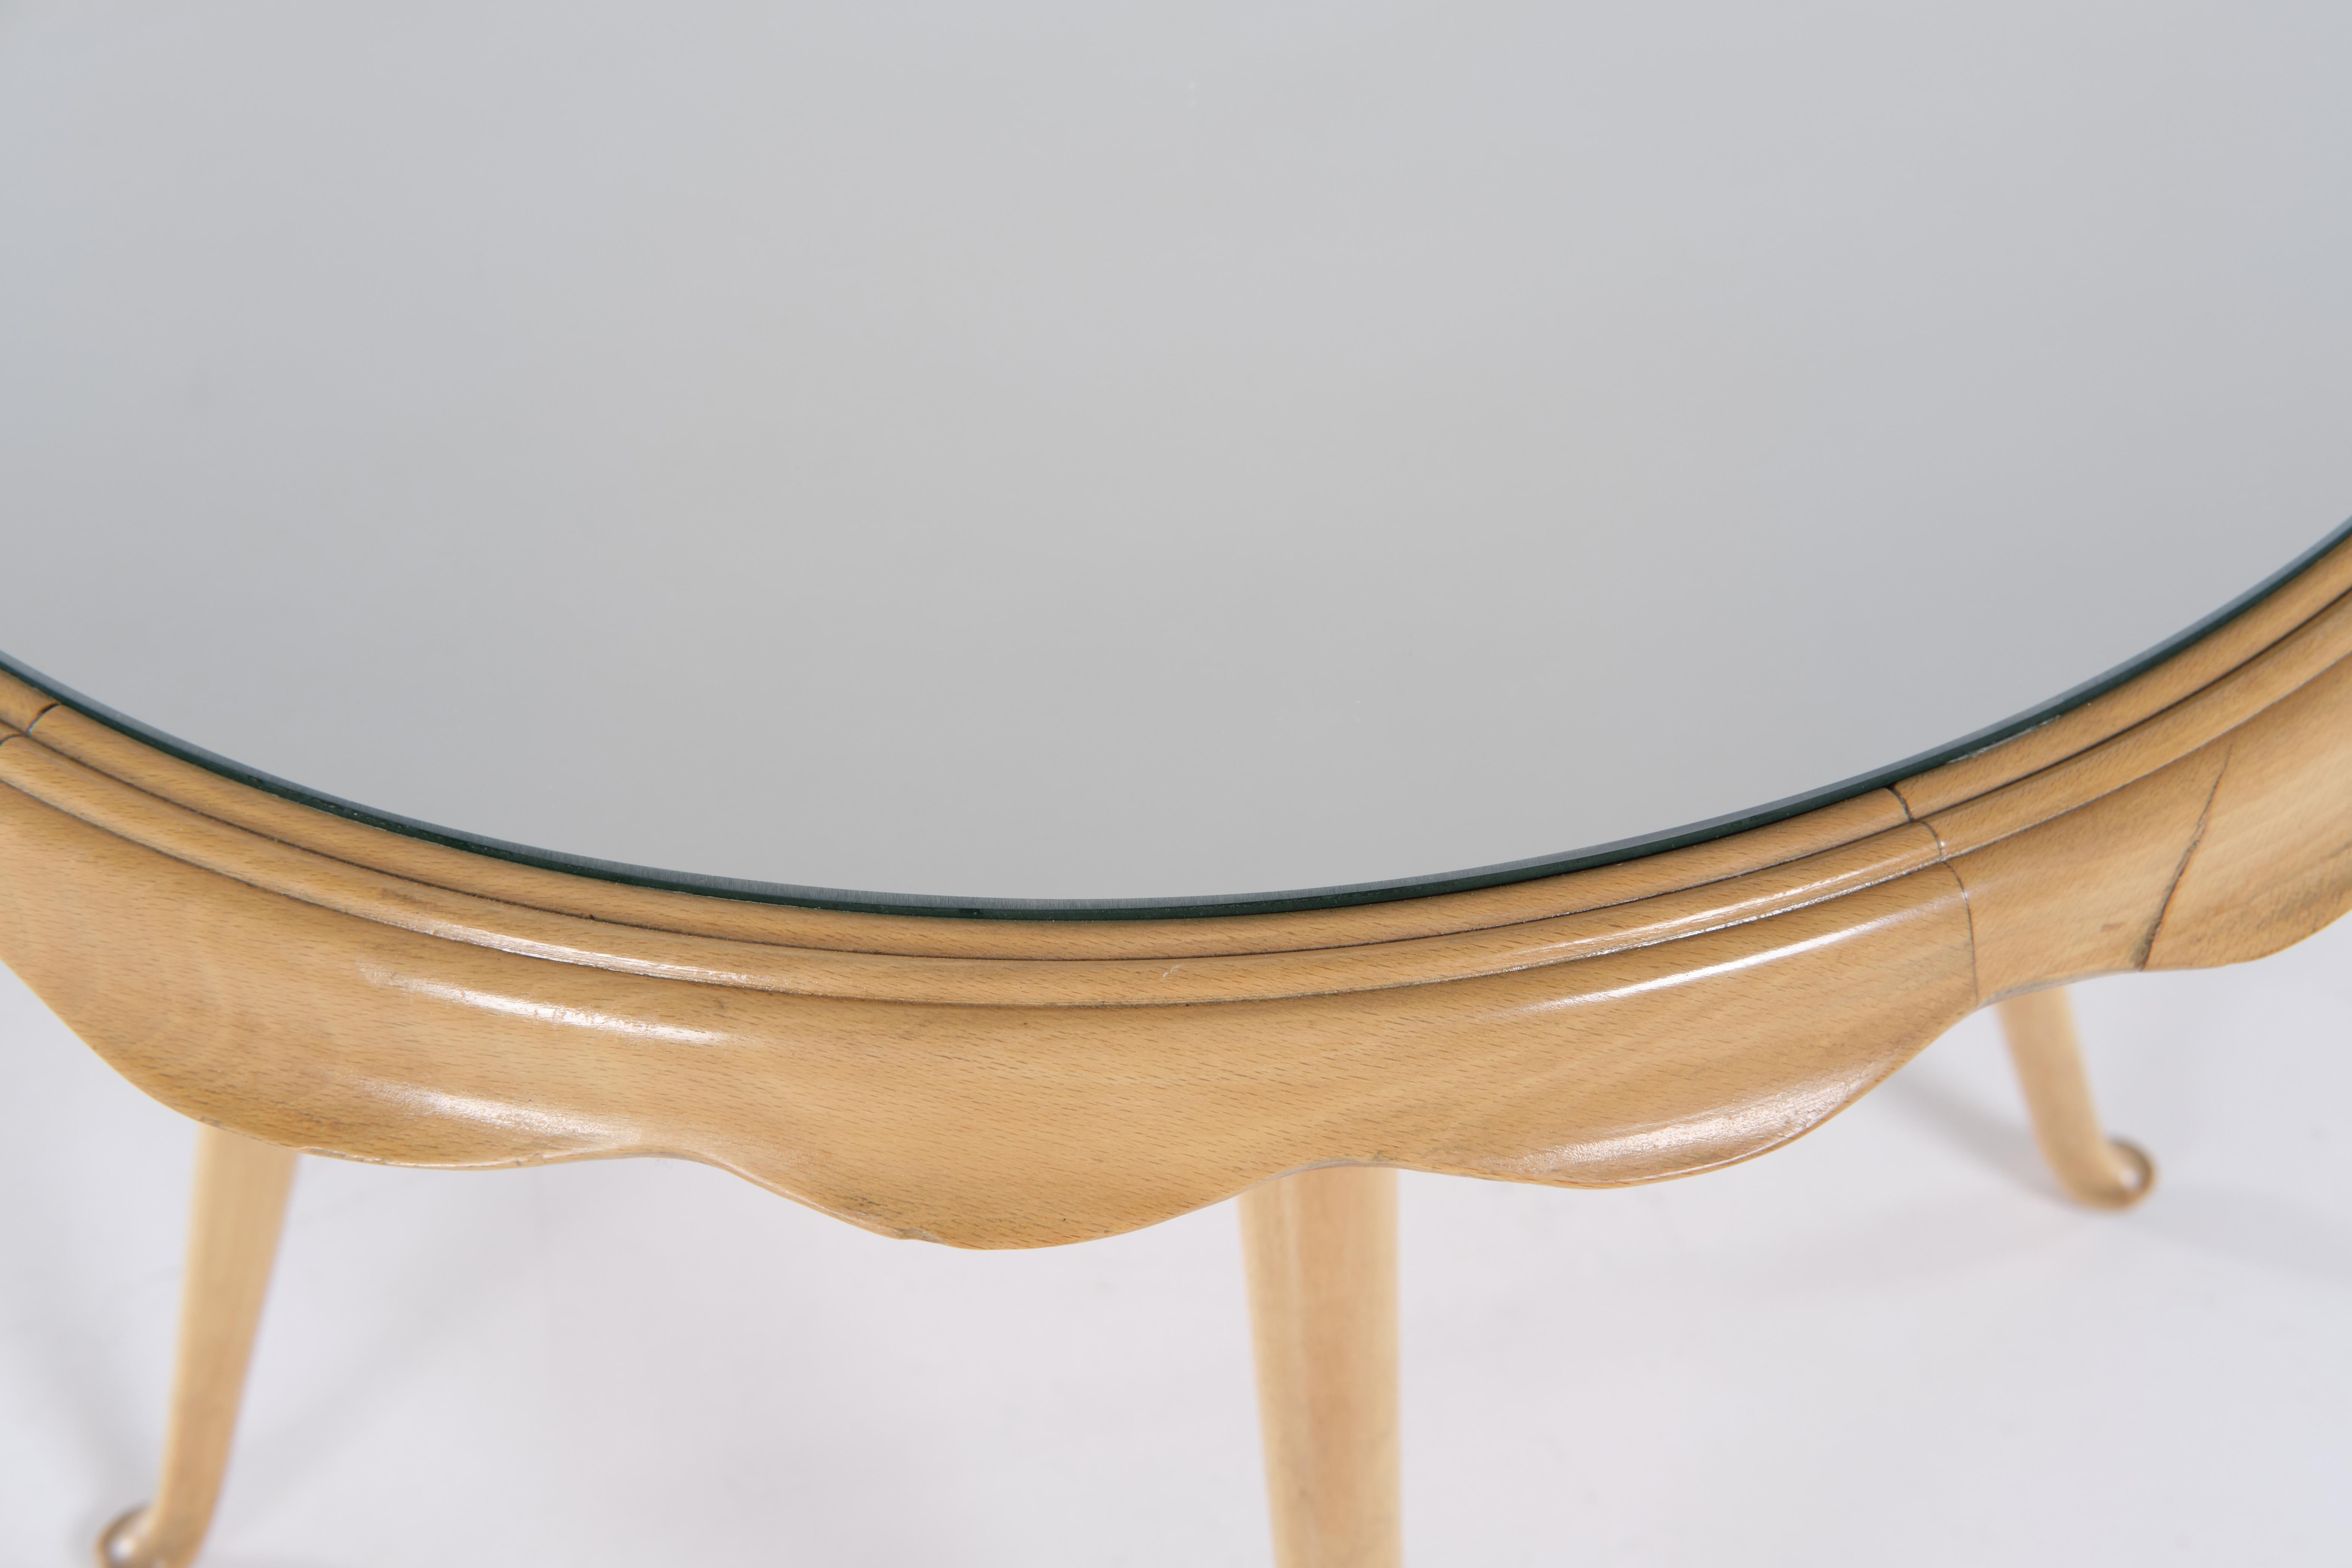 One Wood and Mirrored Glass Low Table, Italian Design, 1950 circa For Sale 4